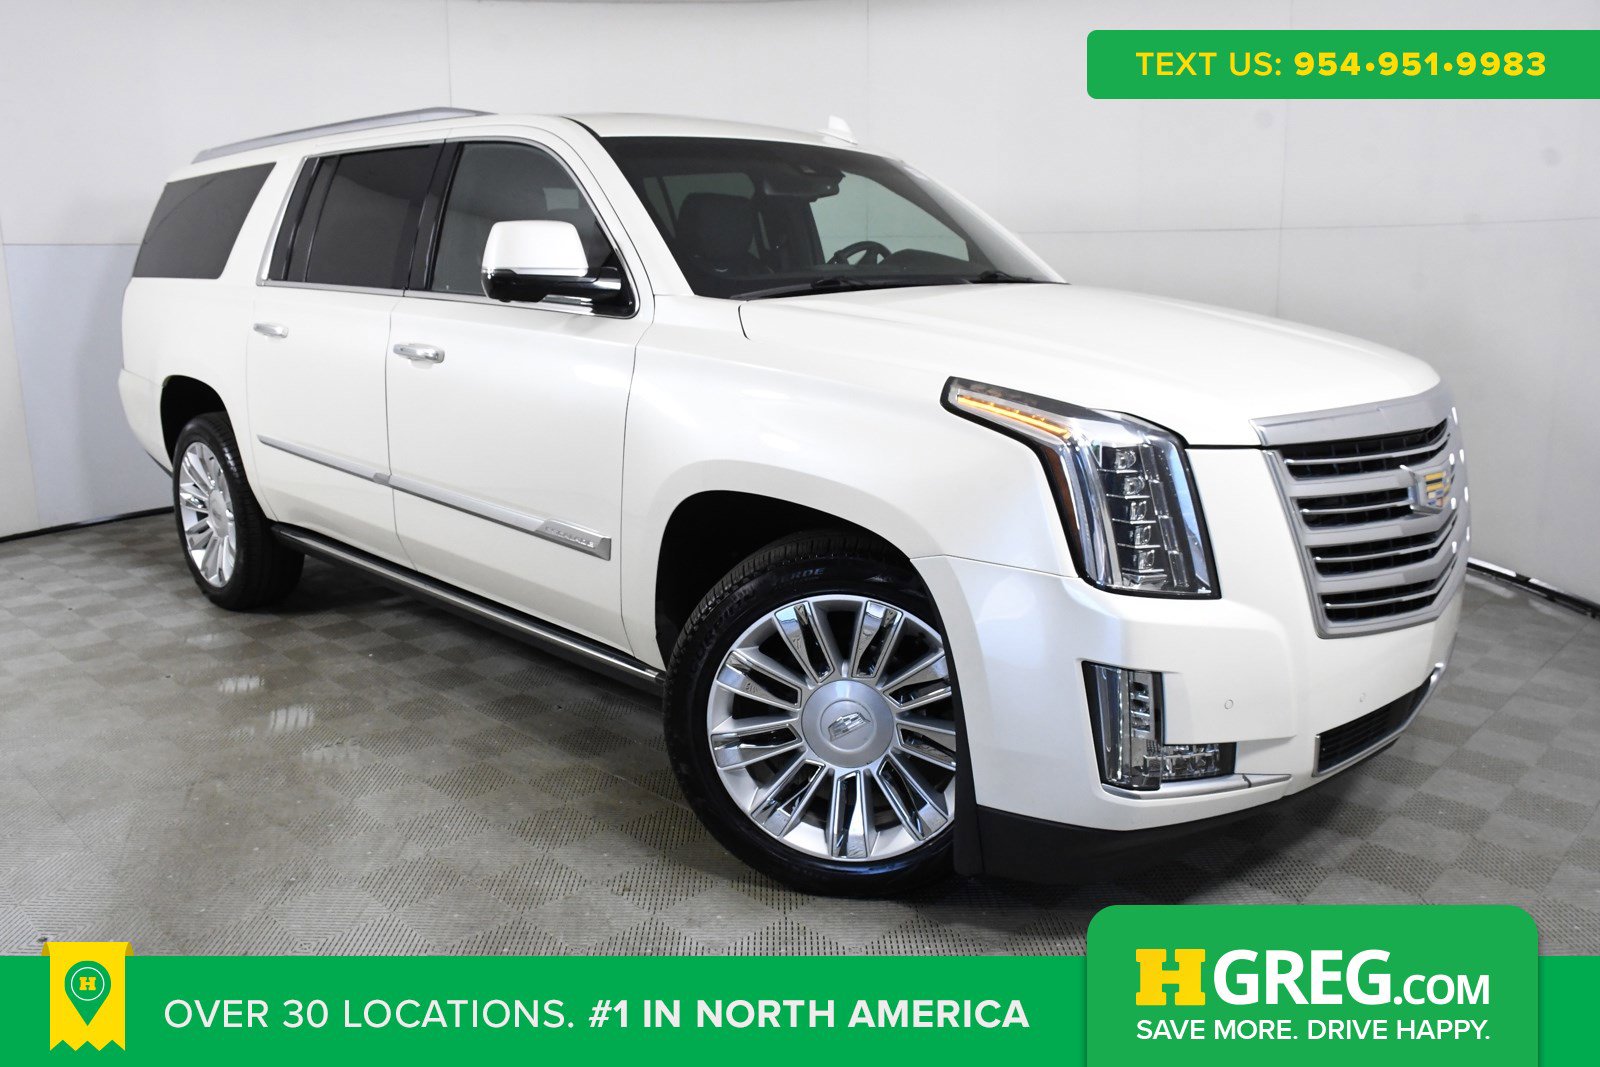 Used 2015 Cadillac Escalade ESV for Sale Right Now - Autotrader